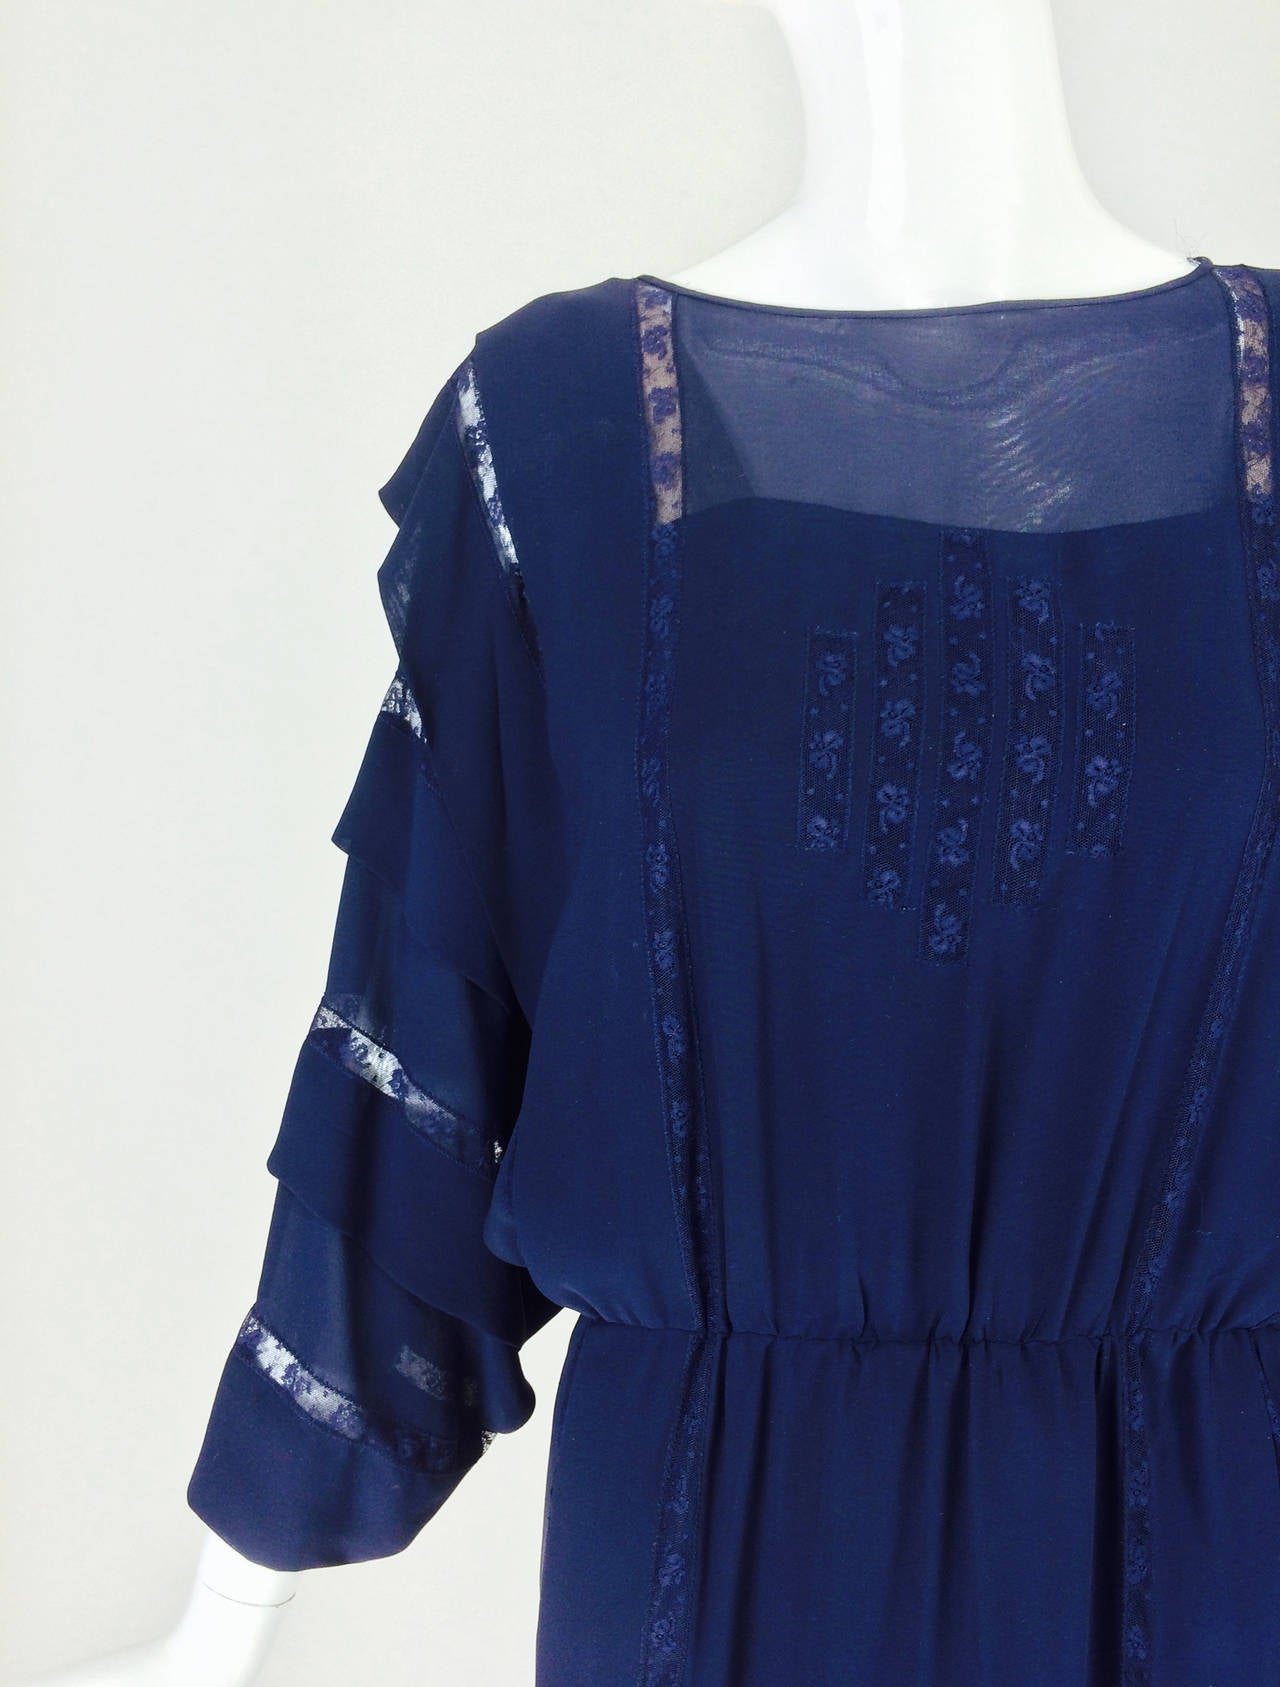 Chloe by Karl Lagerfeld blue chiffon lace insertion dress early 1980s...navy blue chiffon bat wing sleeve dress with sleeves that alternate with tucks and lace insertion...The dress front has a panel of lace insertion...Round banded neckline...The